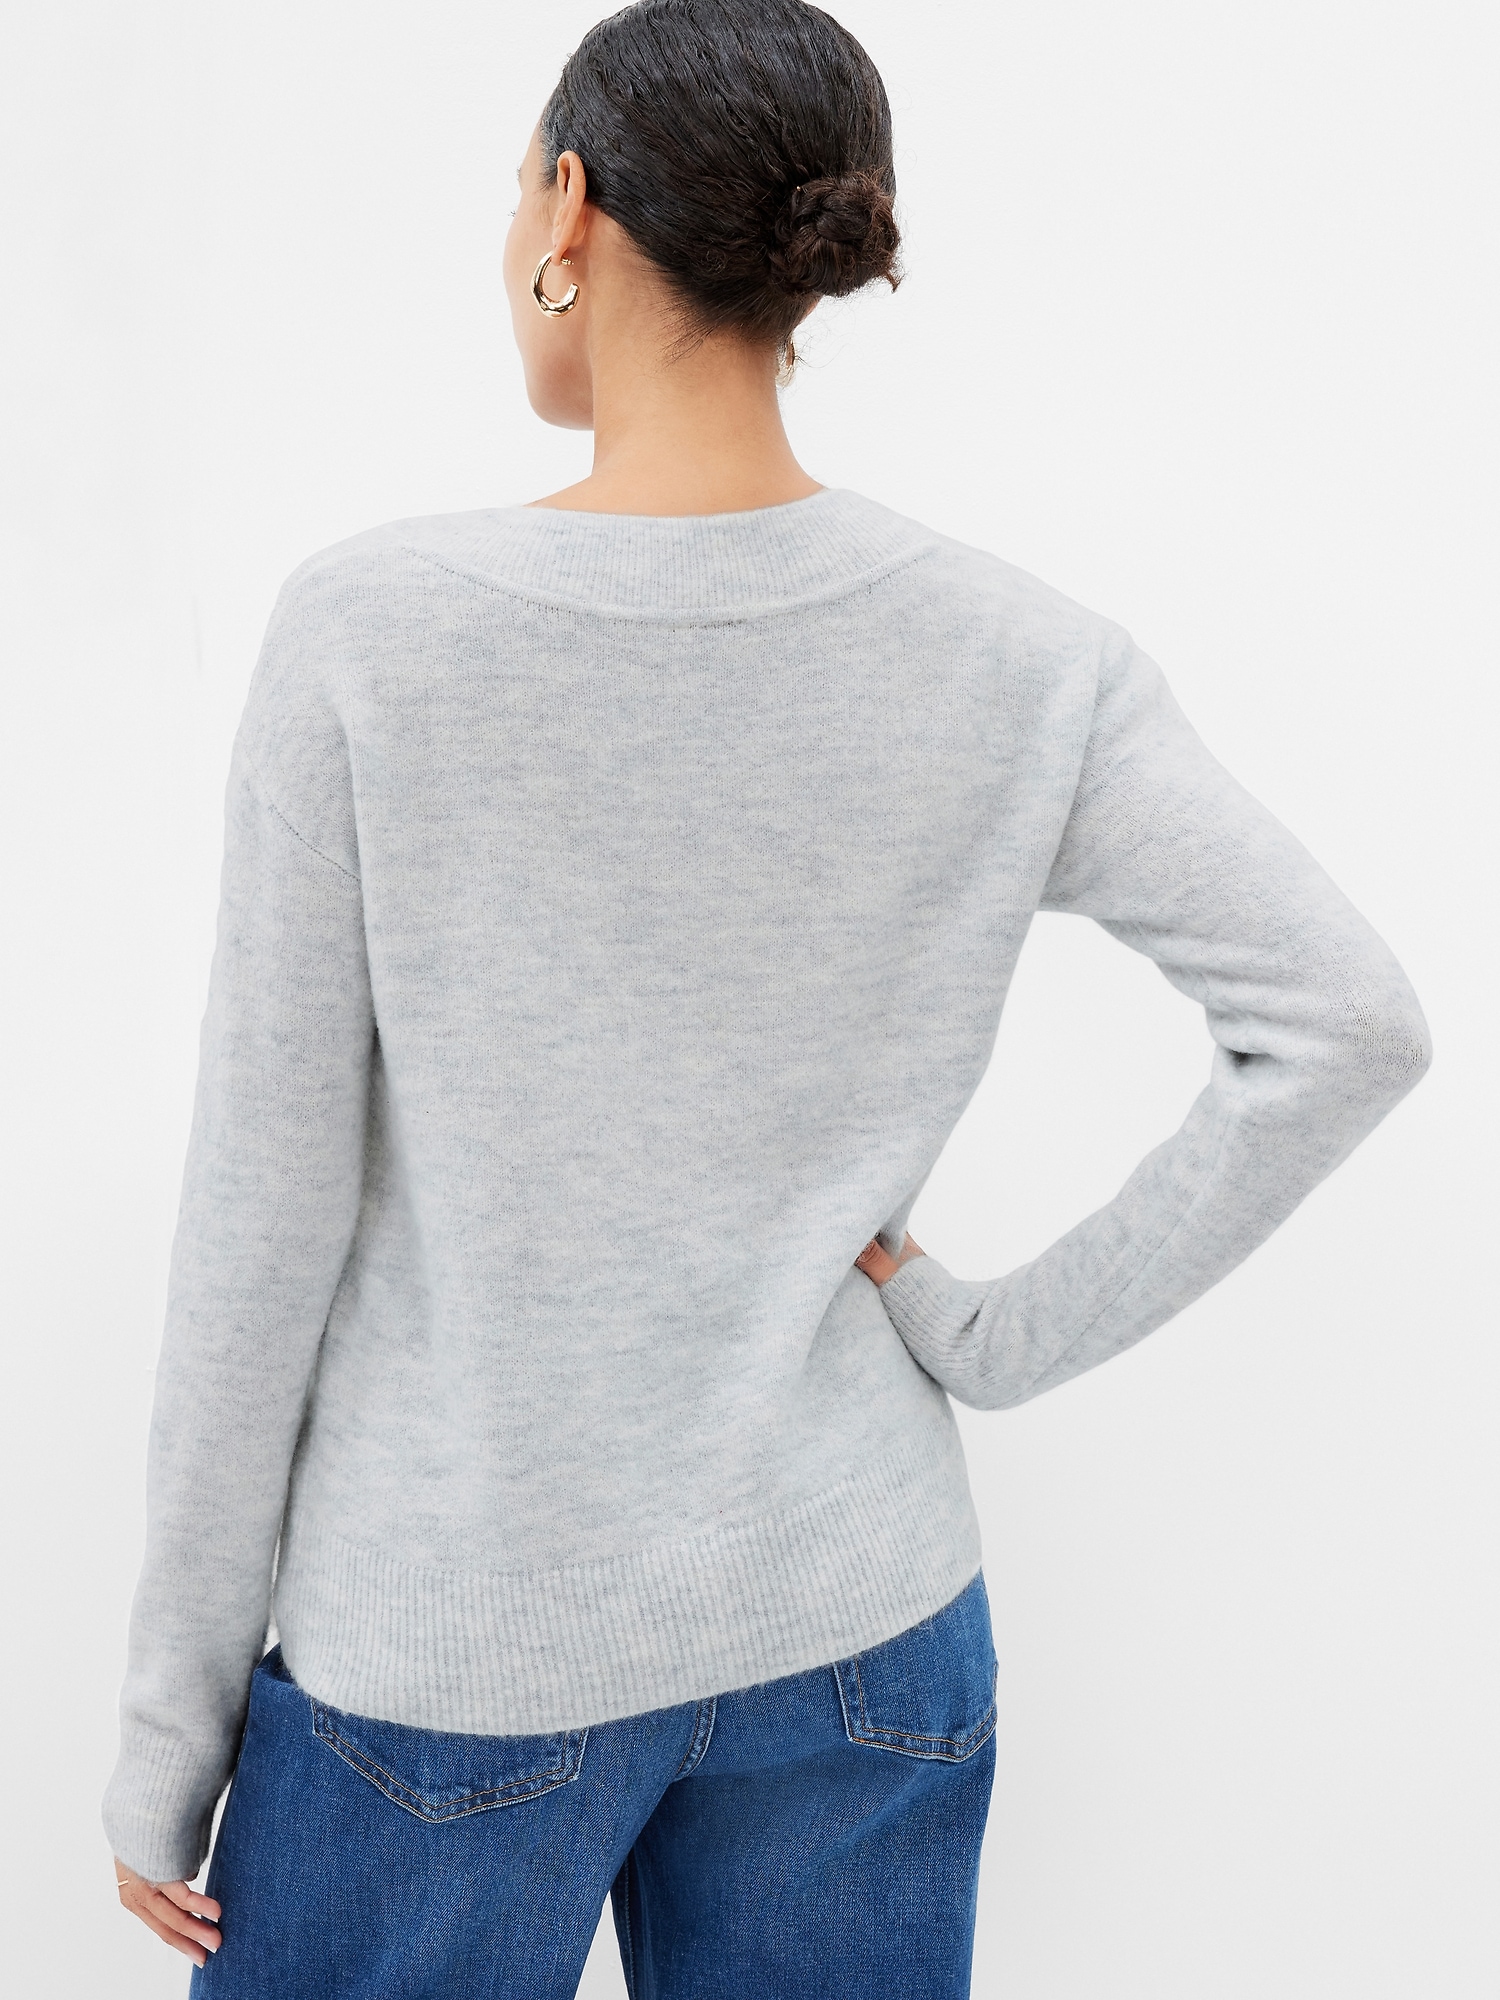 Relaxed Forever Cozy V-Neck Sweater | Gap Factory